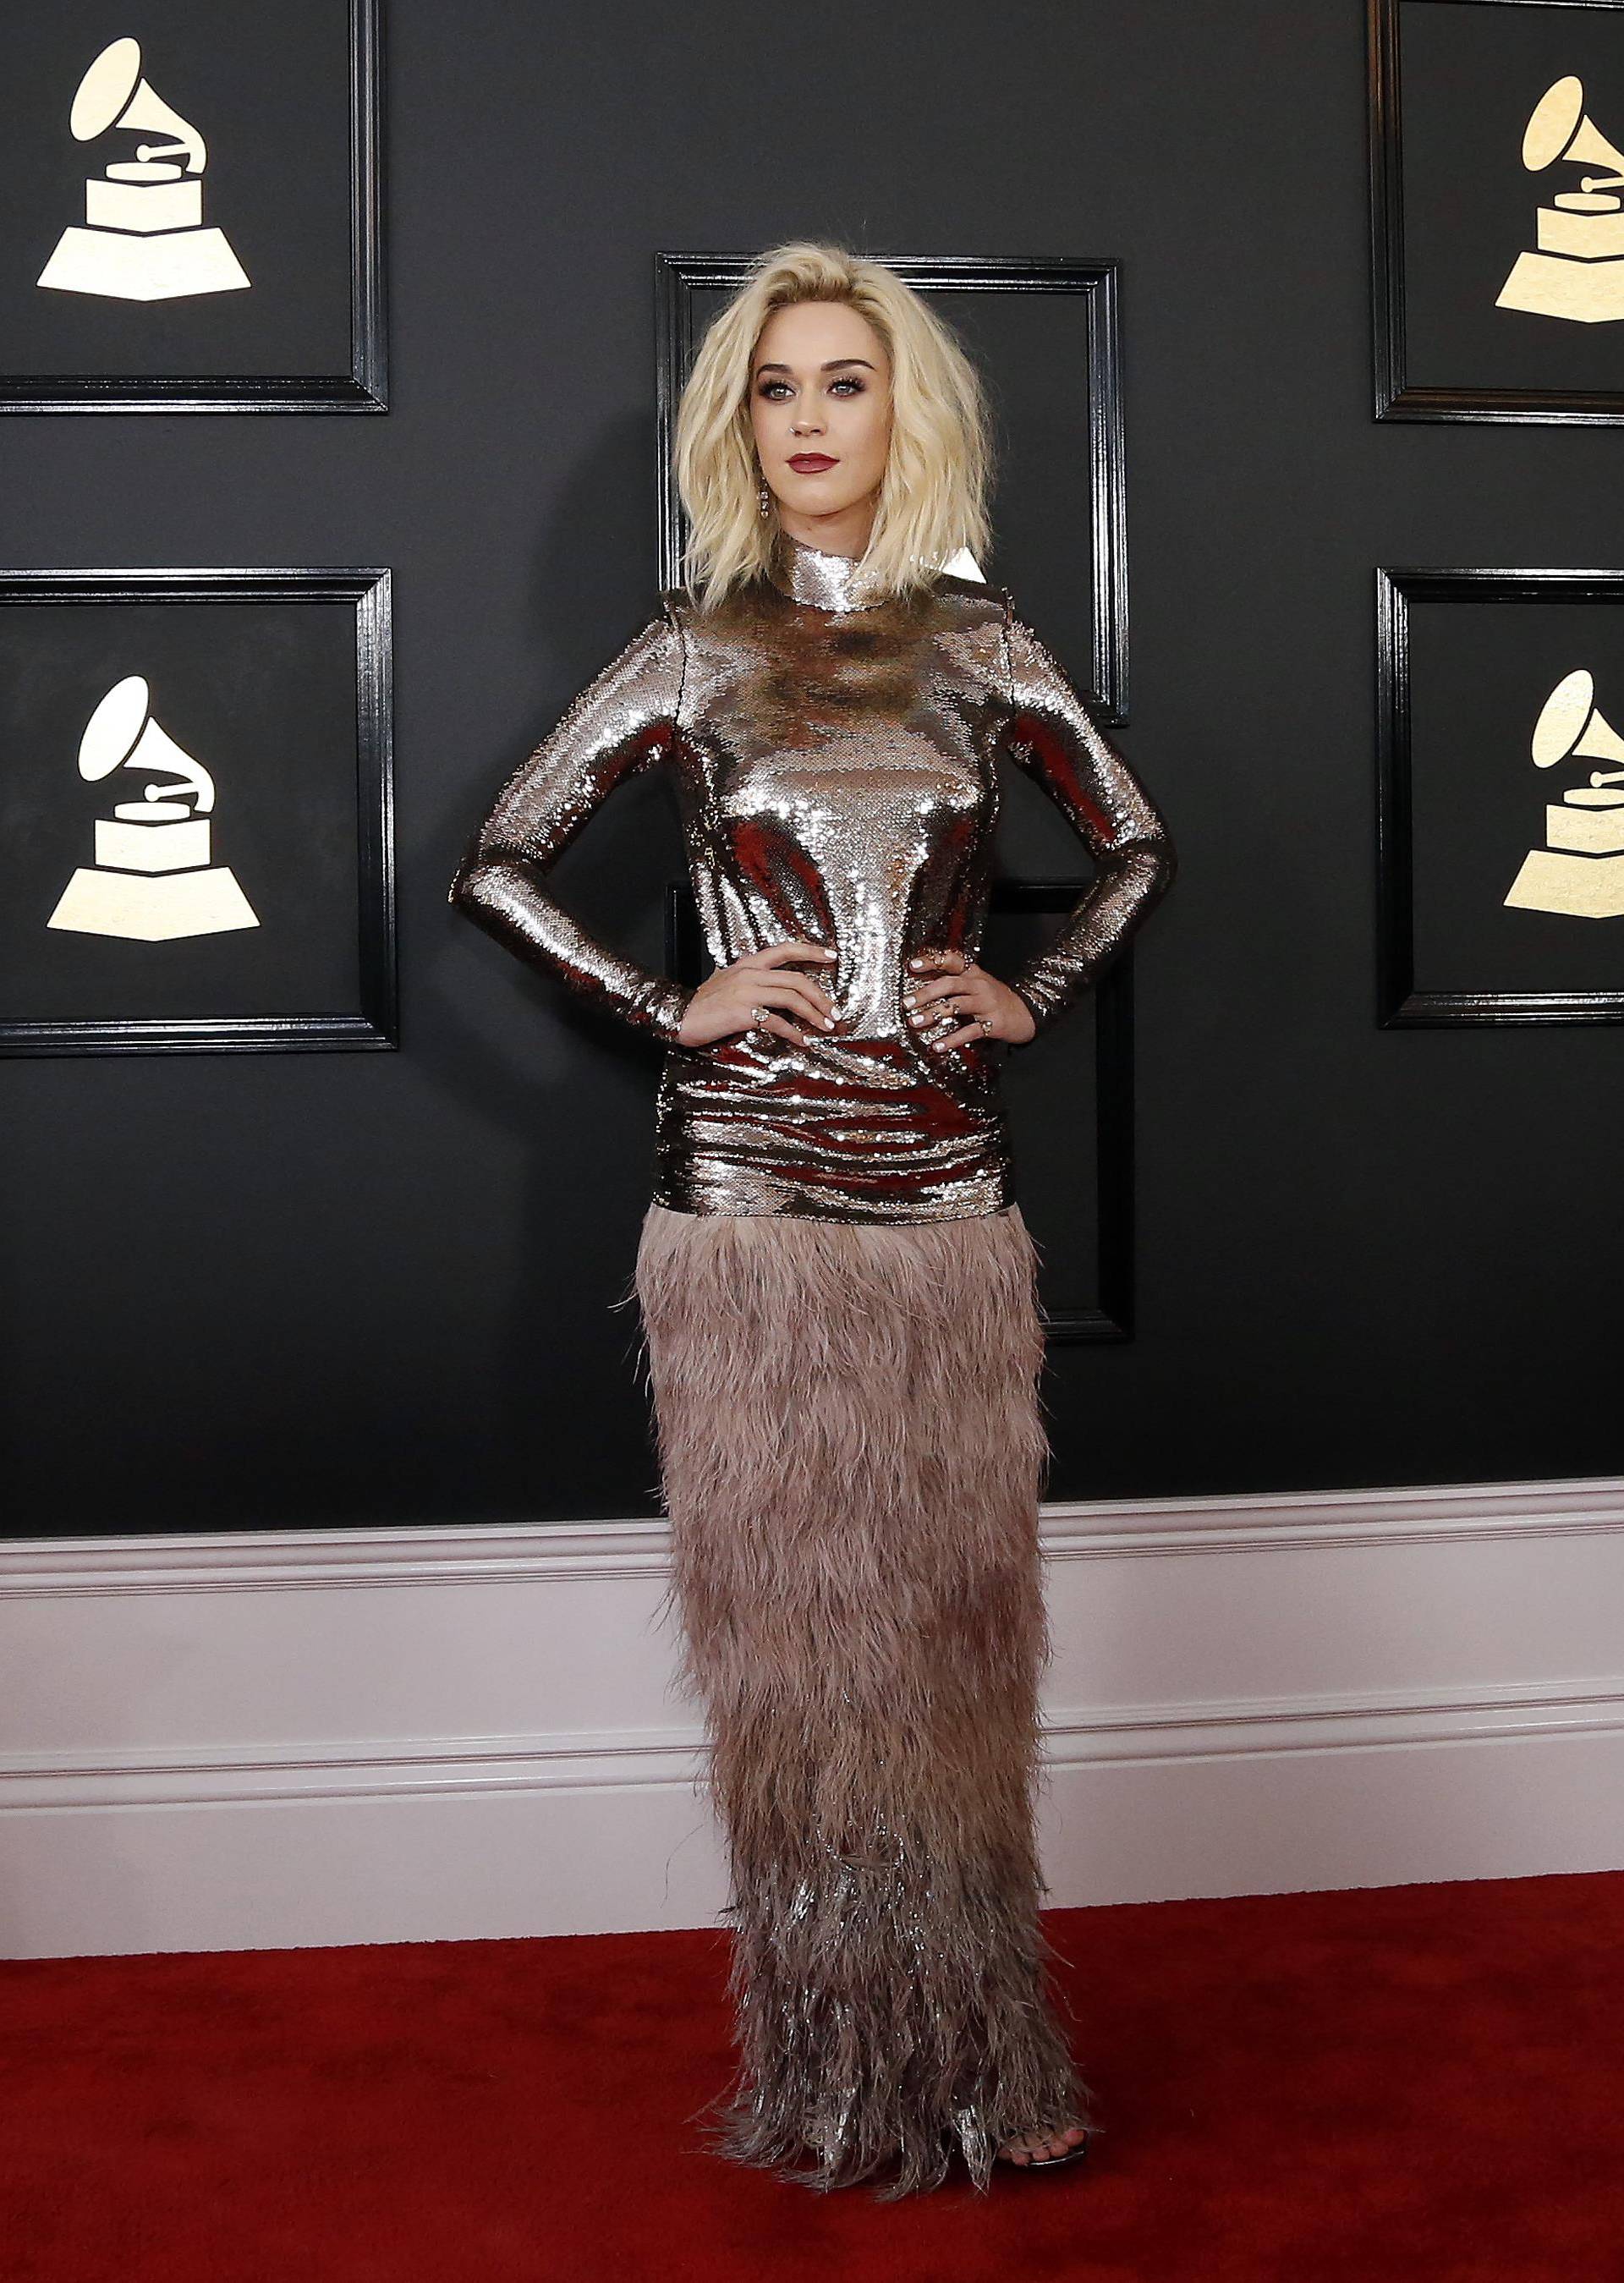 Singer Katy Perry arrives at the 59th Annual Grammy Awards in Los Angeles